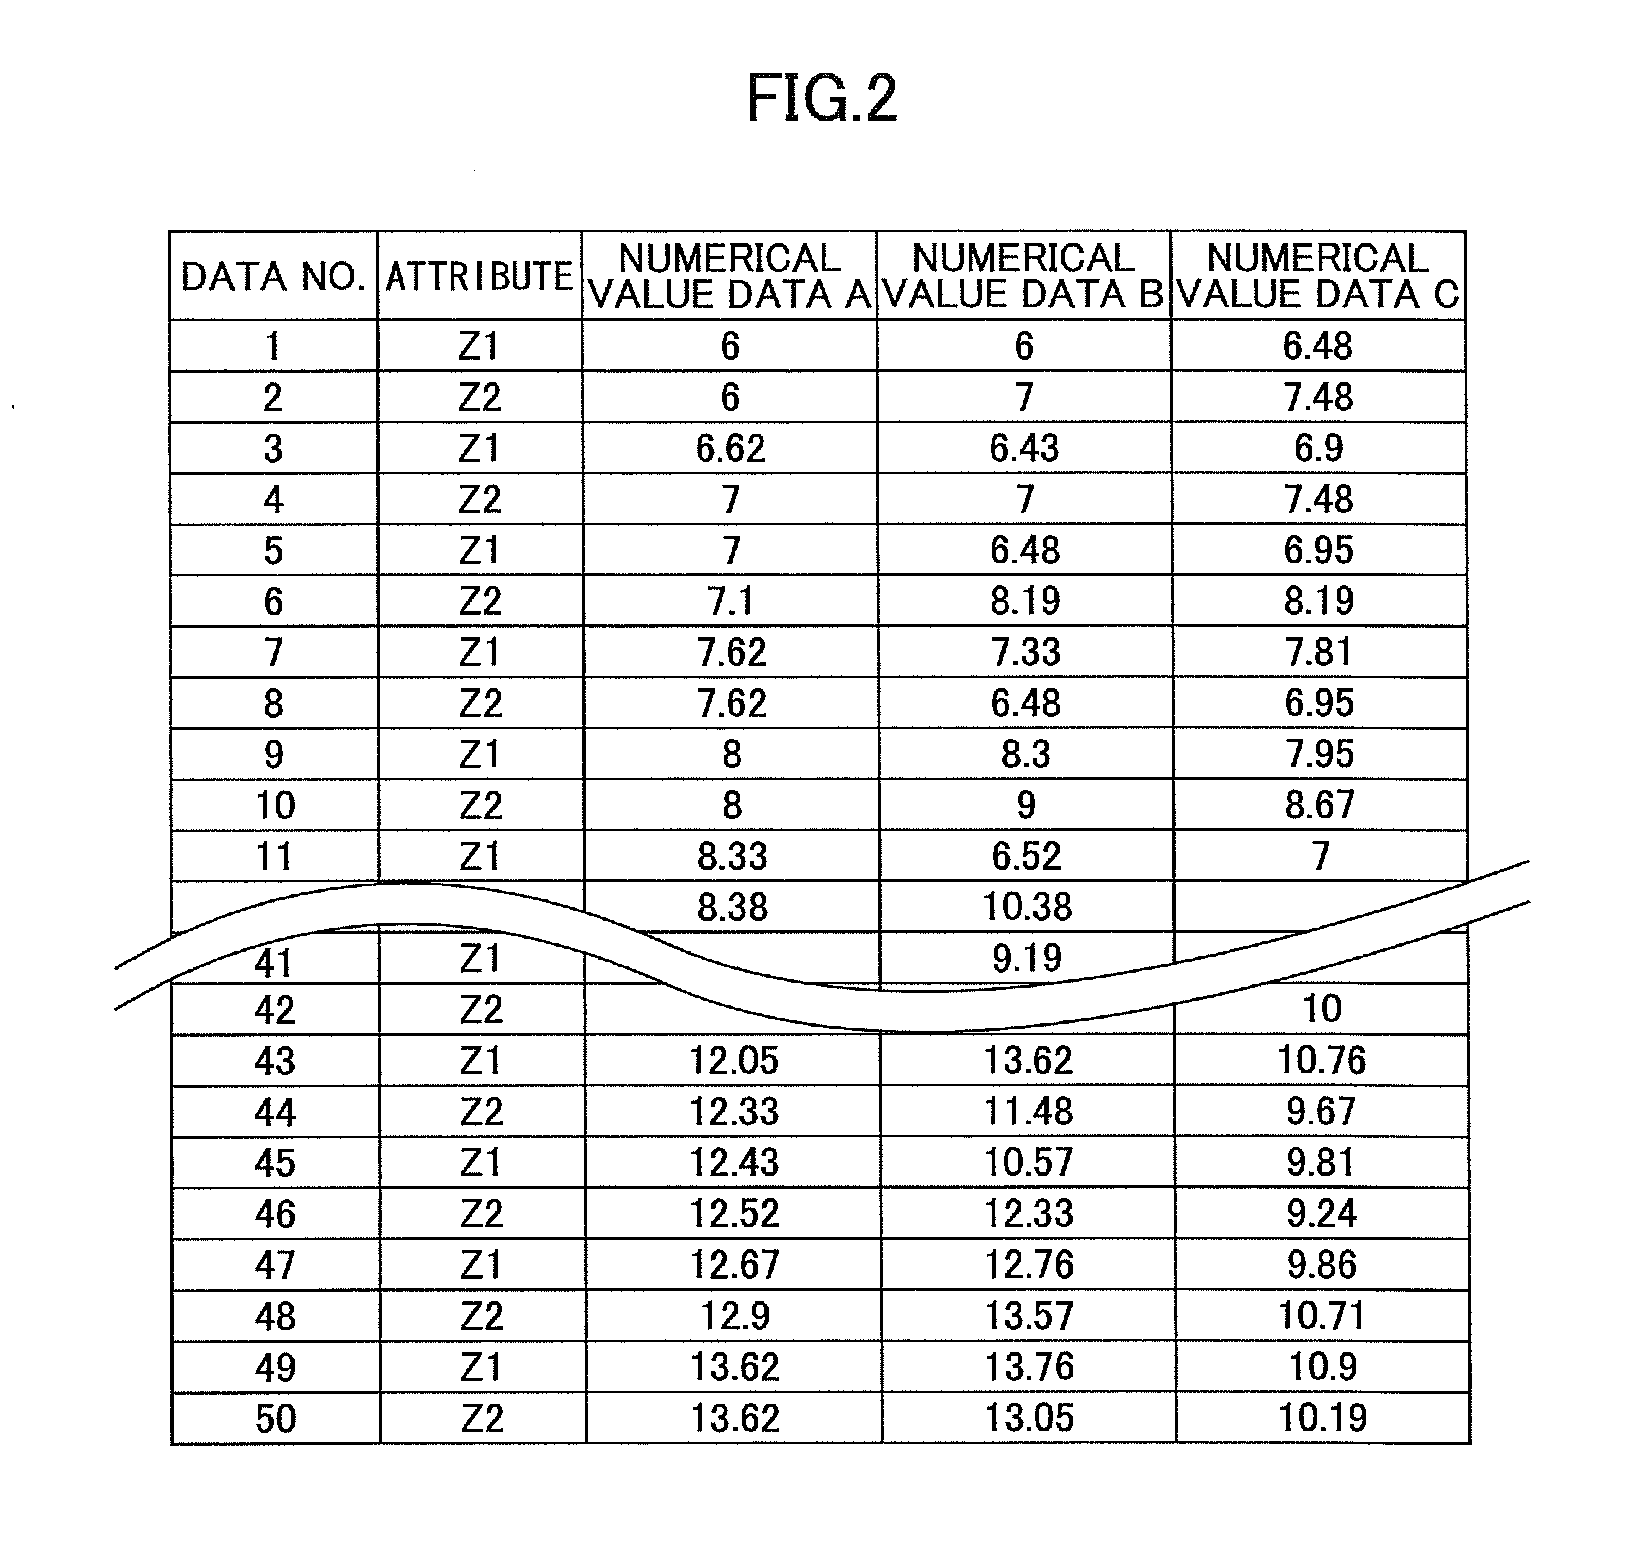 Method and computer program product for plotting distribution area of data points in scatter diagram